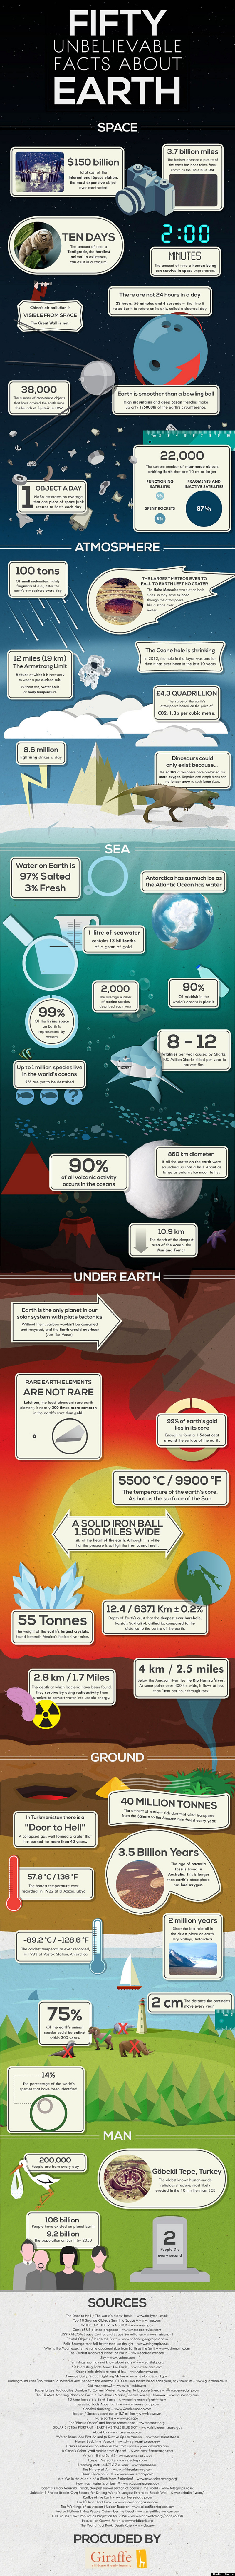 Facts-About-Our-Planet-Earth